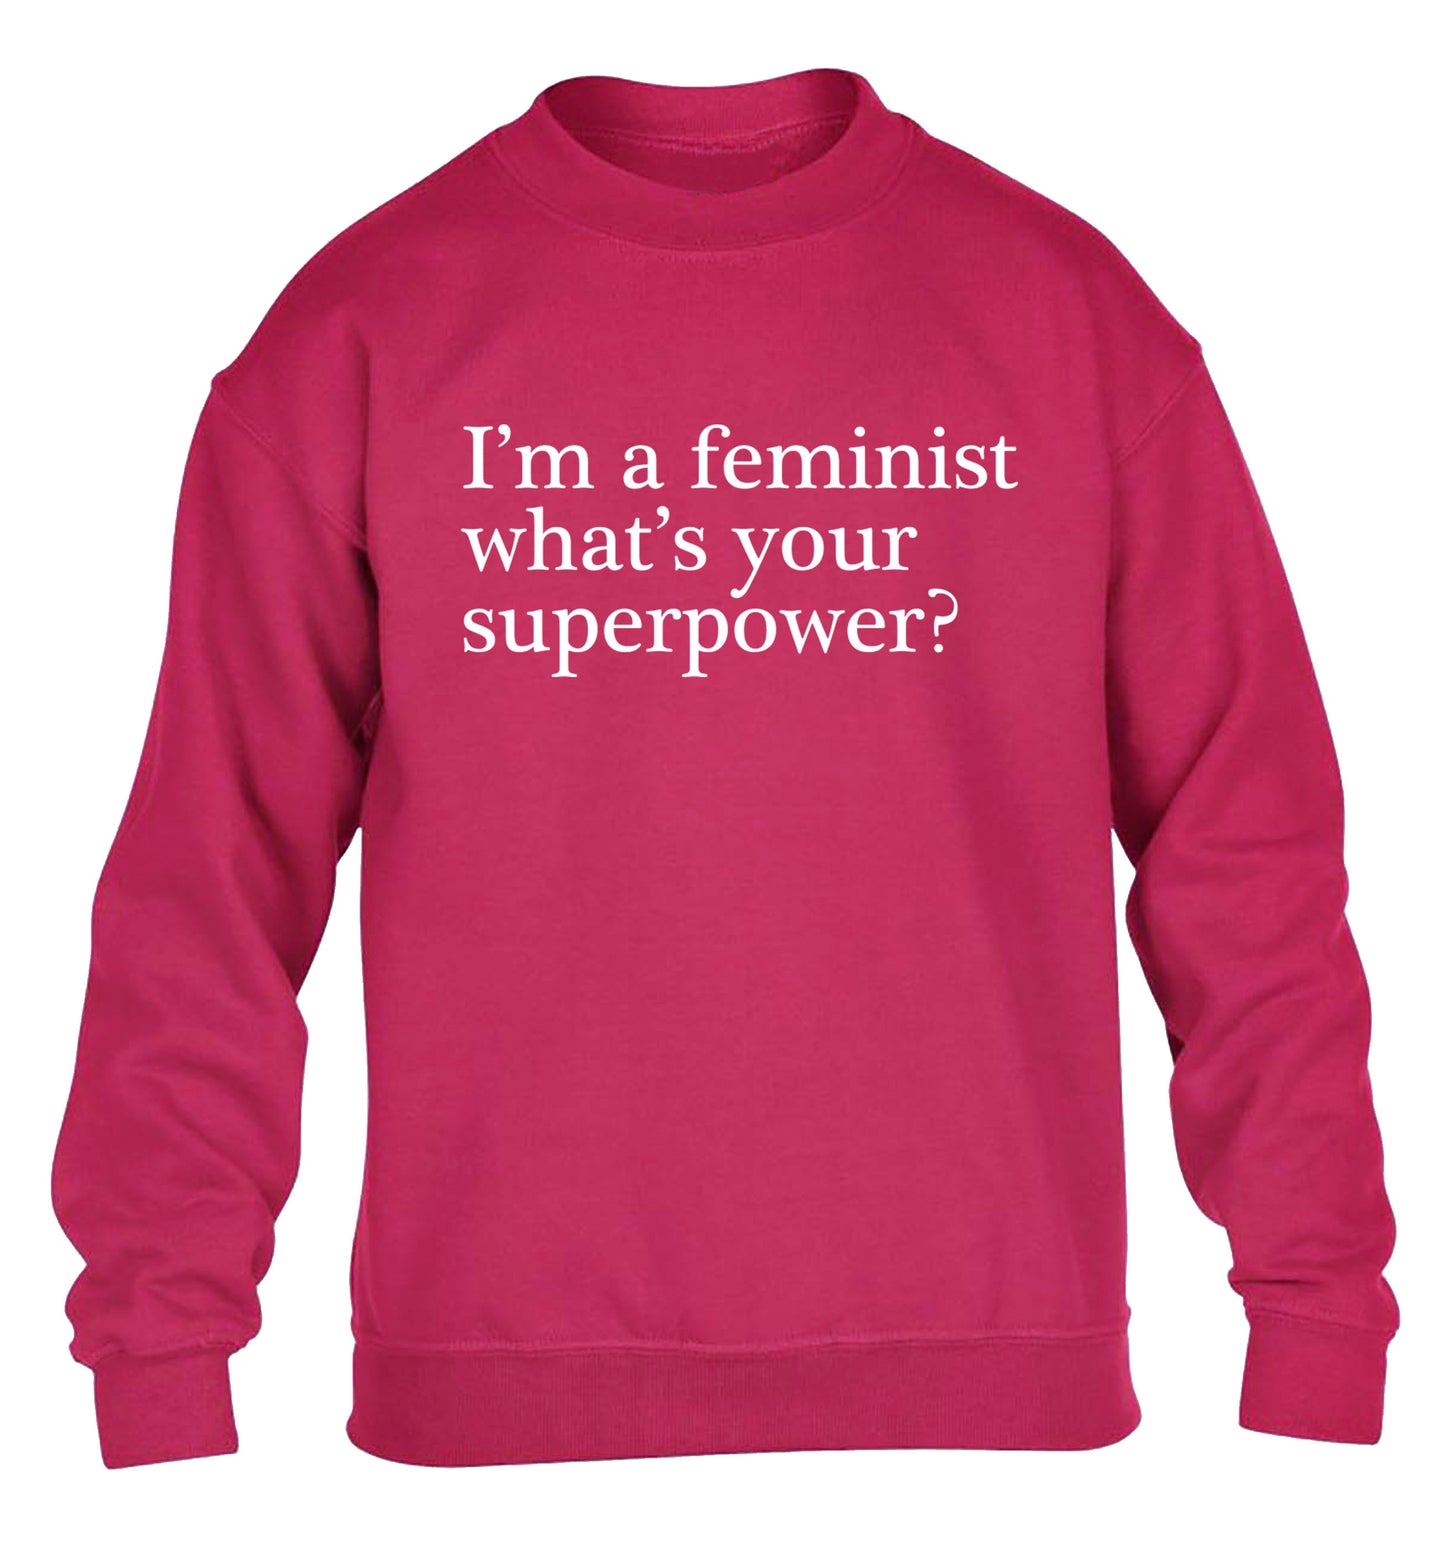 I'm a feminist what's your superpower? children's pink sweater 12-14 Years